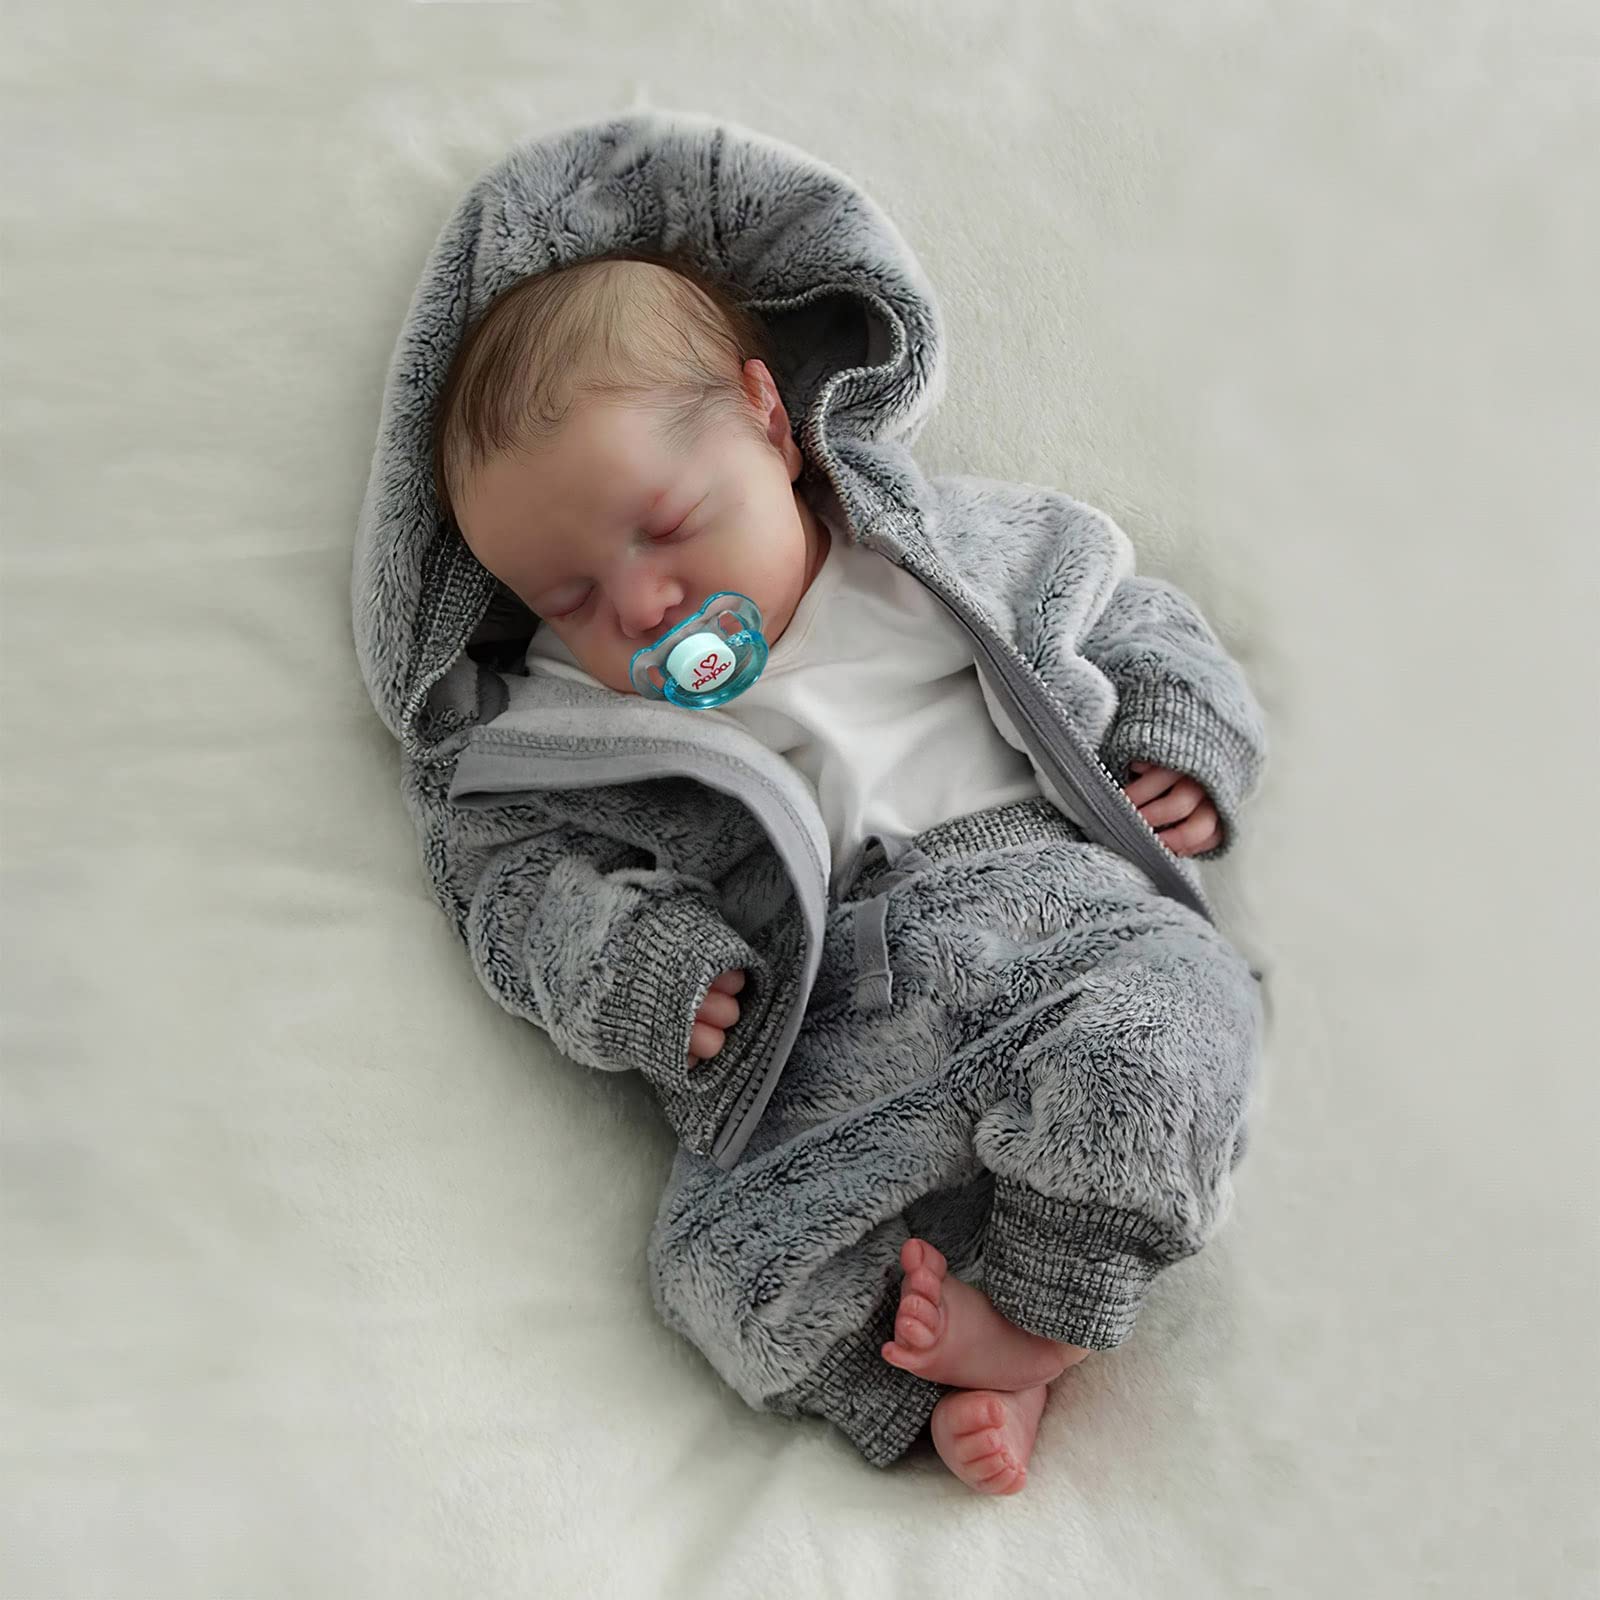 BABESIDE Lifelike Reborn Baby Dolls Boys - 17-Inch Real Baby Feeling Realistic-Newborn Baby Dolls Full Body Vinyl Anatomically Correct Real Life Baby Dolls with Accessories Gift Set for Kids Age 3+